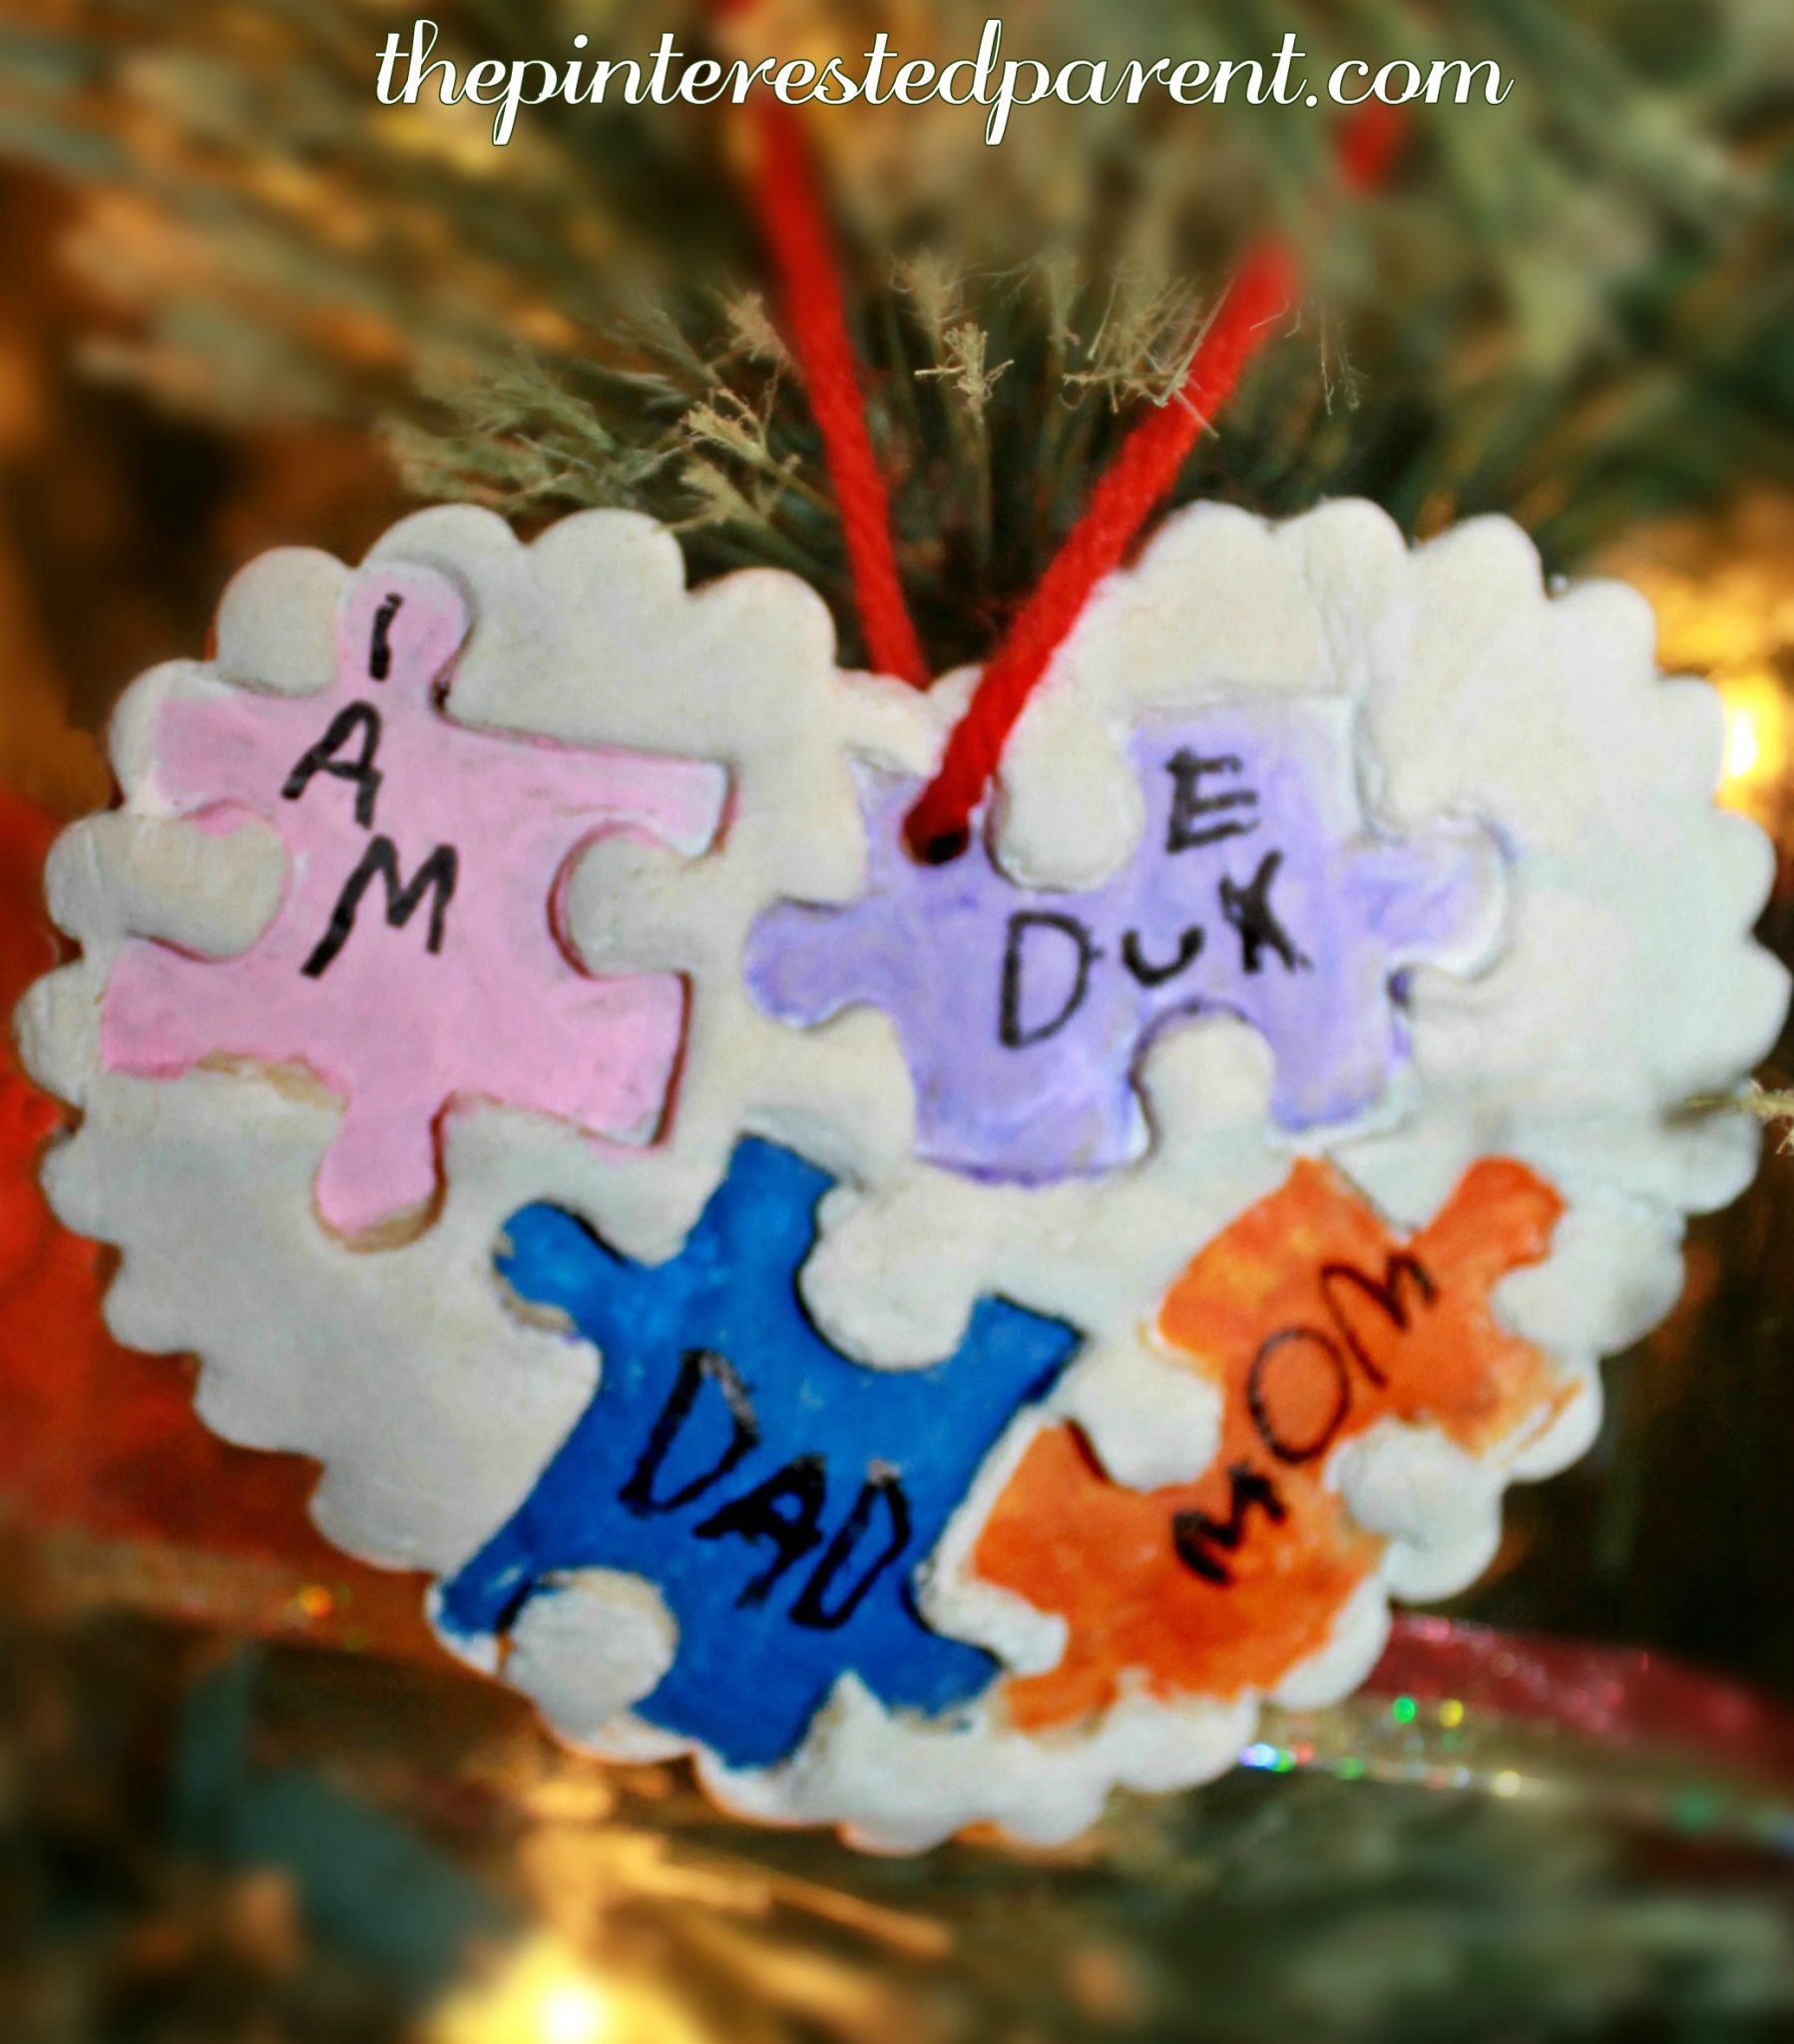 Pieces of my heart salt dough puzzle piece ornaments that kids can actually make. Christmas arts and crafts. This is a sweet handmade gift that your children can make for the family.